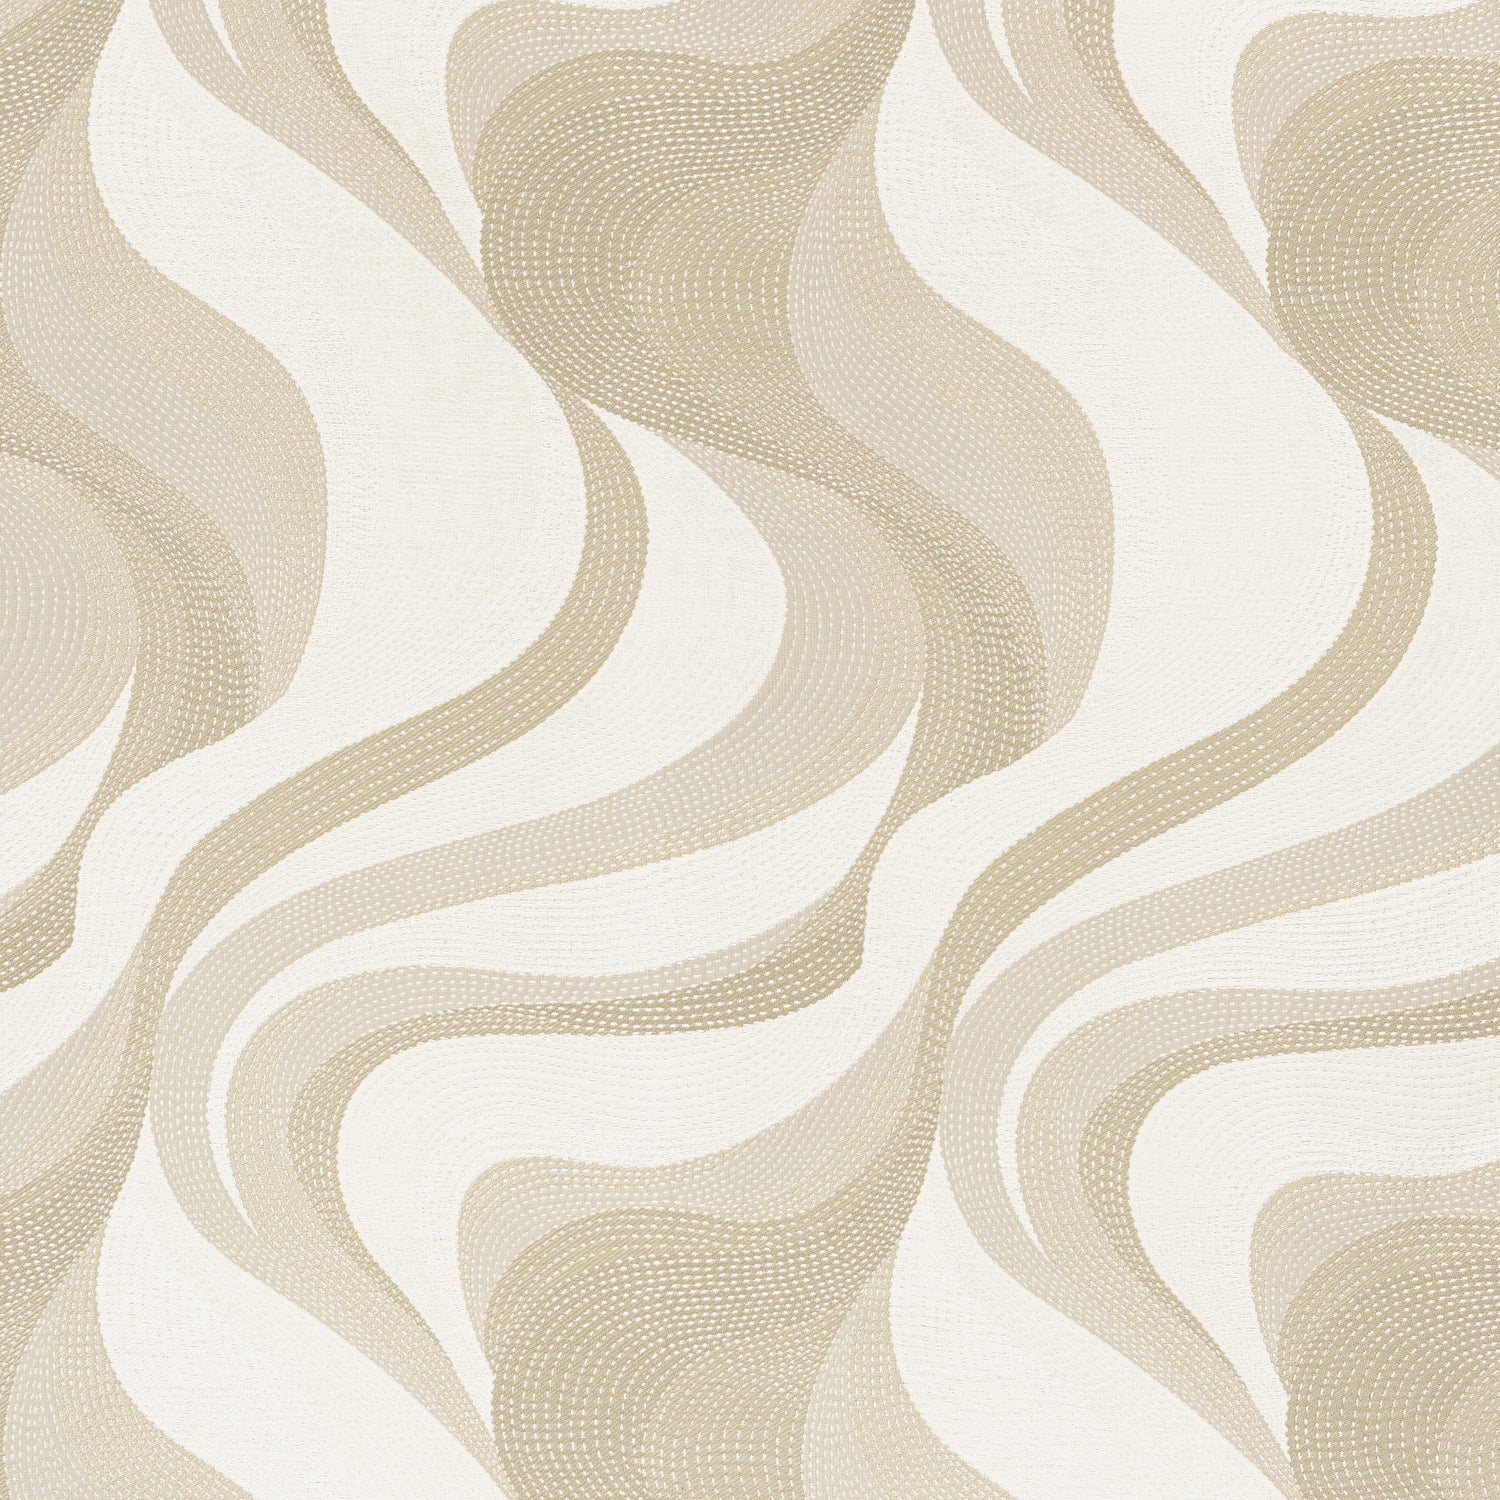 Passage fabric in linen color - pattern number W74205 - by Thibaut in the Passage collection